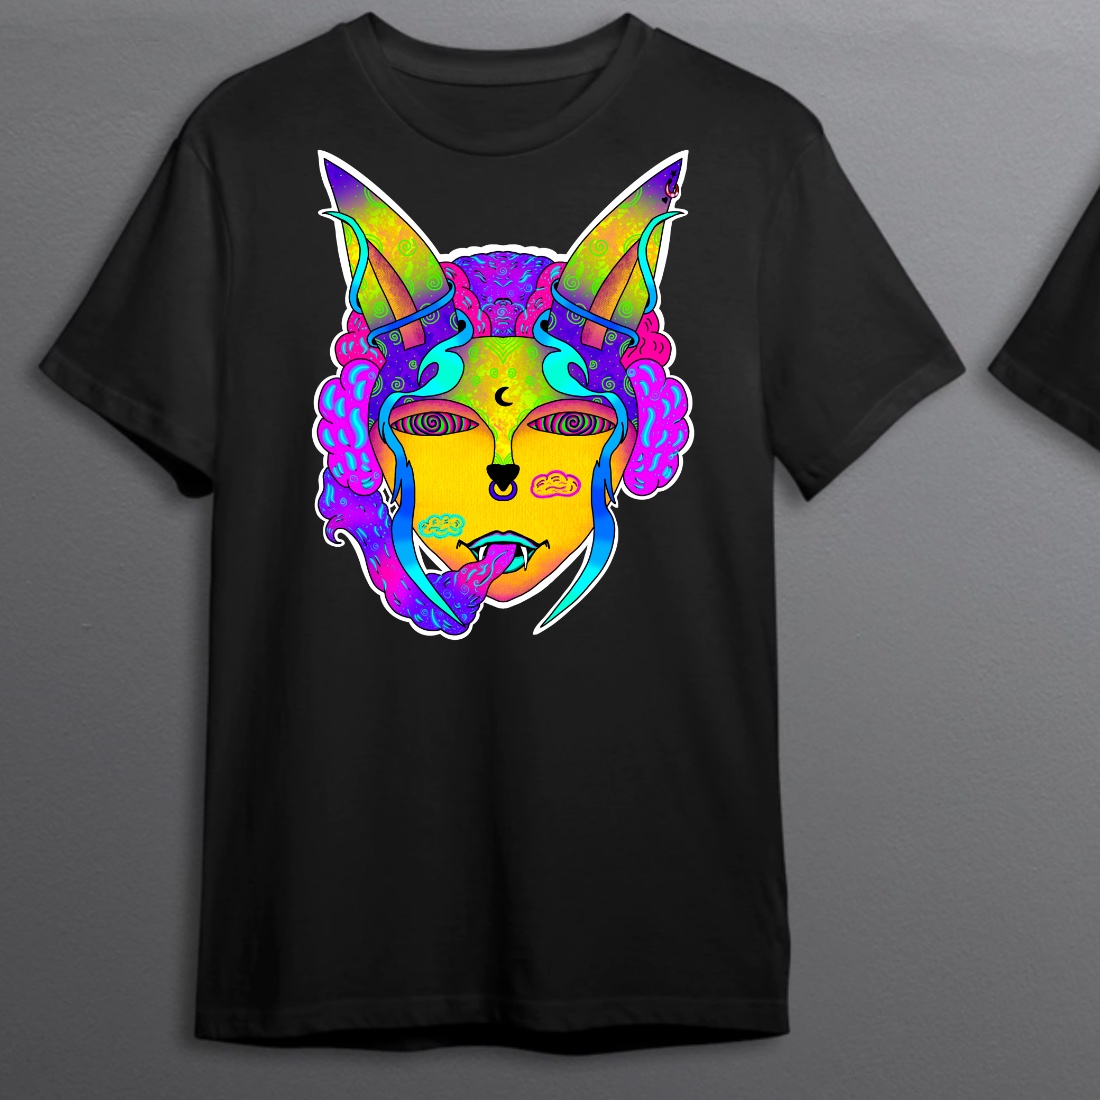 Black t-shirt with the vivid psyhedelic face.